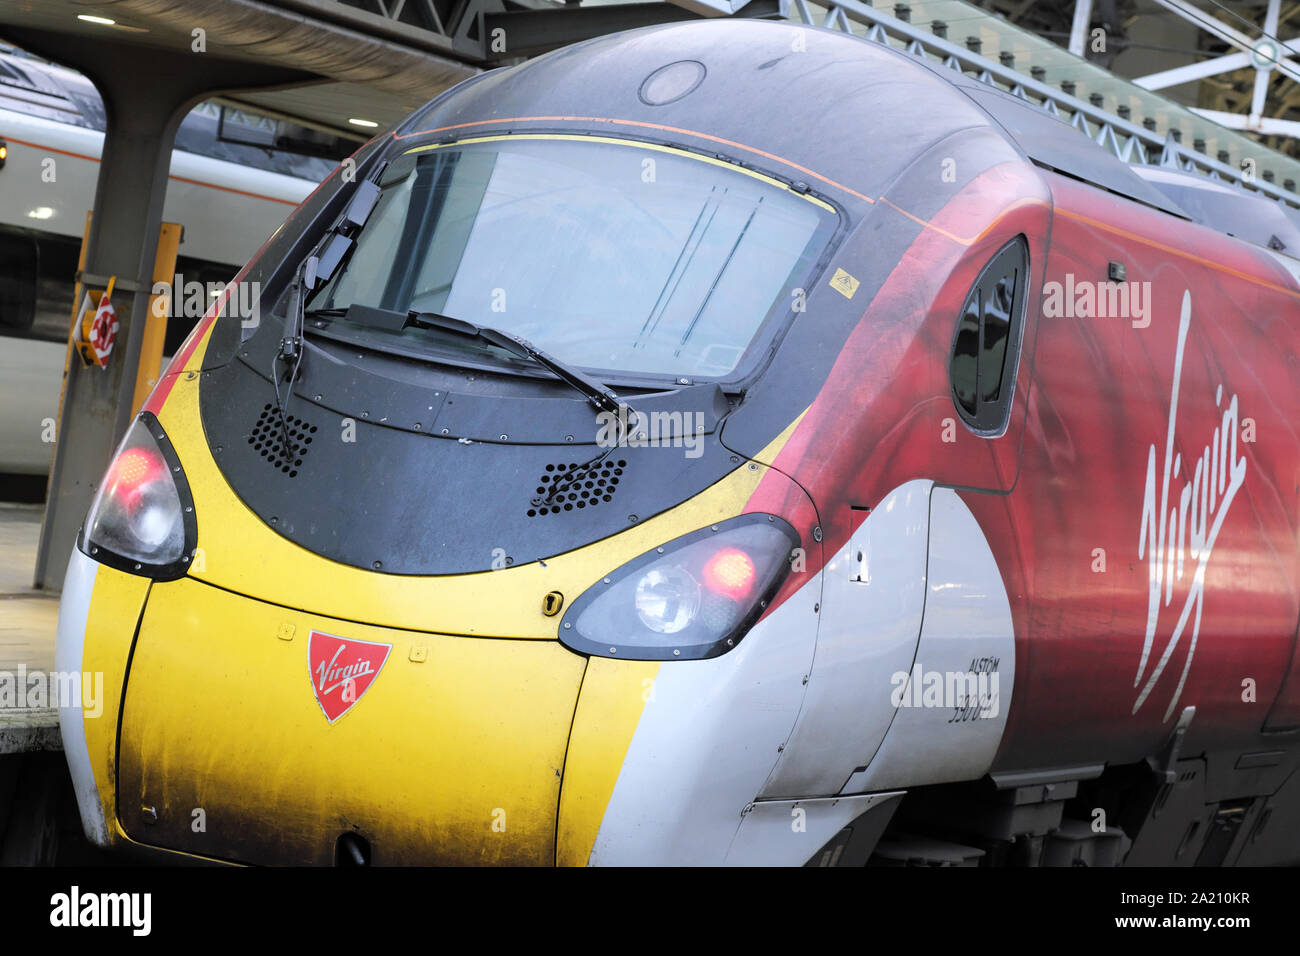 Virgin Trains class 309 Pendolino passenger train at Manchester Piccadilly station in 2019 Stock Photo